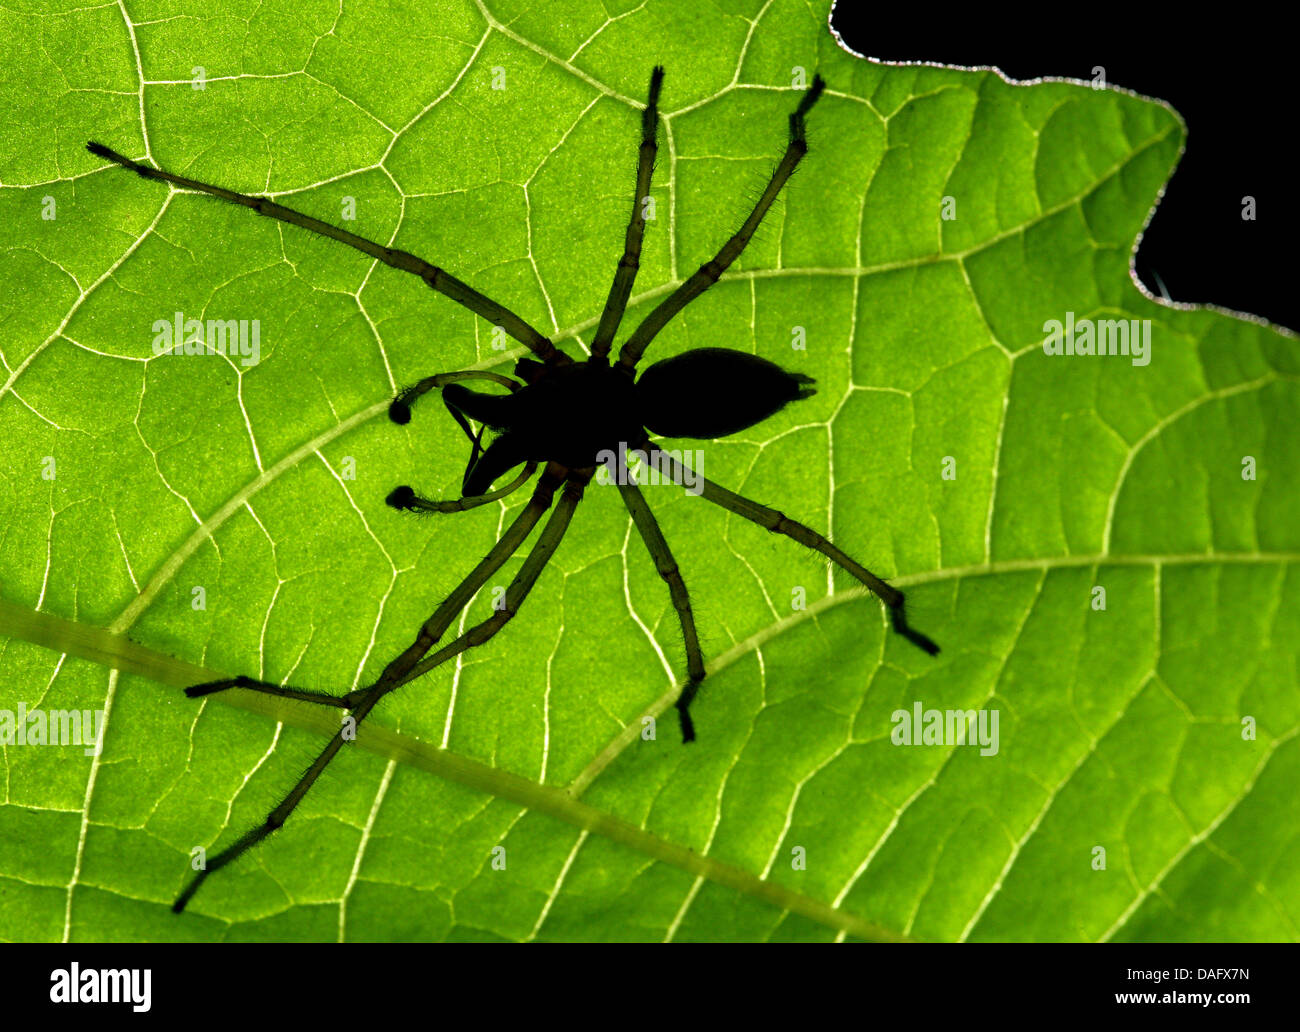 (dpa-file) - A file picture dated 01 August 2007 shows the silhouette of a sac spider (Cheiracanthium punctorium) in Briesen, Germany. The car company Mazda has begun a recall in the USA: spiders are capable of bursting the tank of cars, because they tend to create spider webs within the ventilation system. Especially the sac spider is now known to have this tendency. Photo: Patric Stock Photo